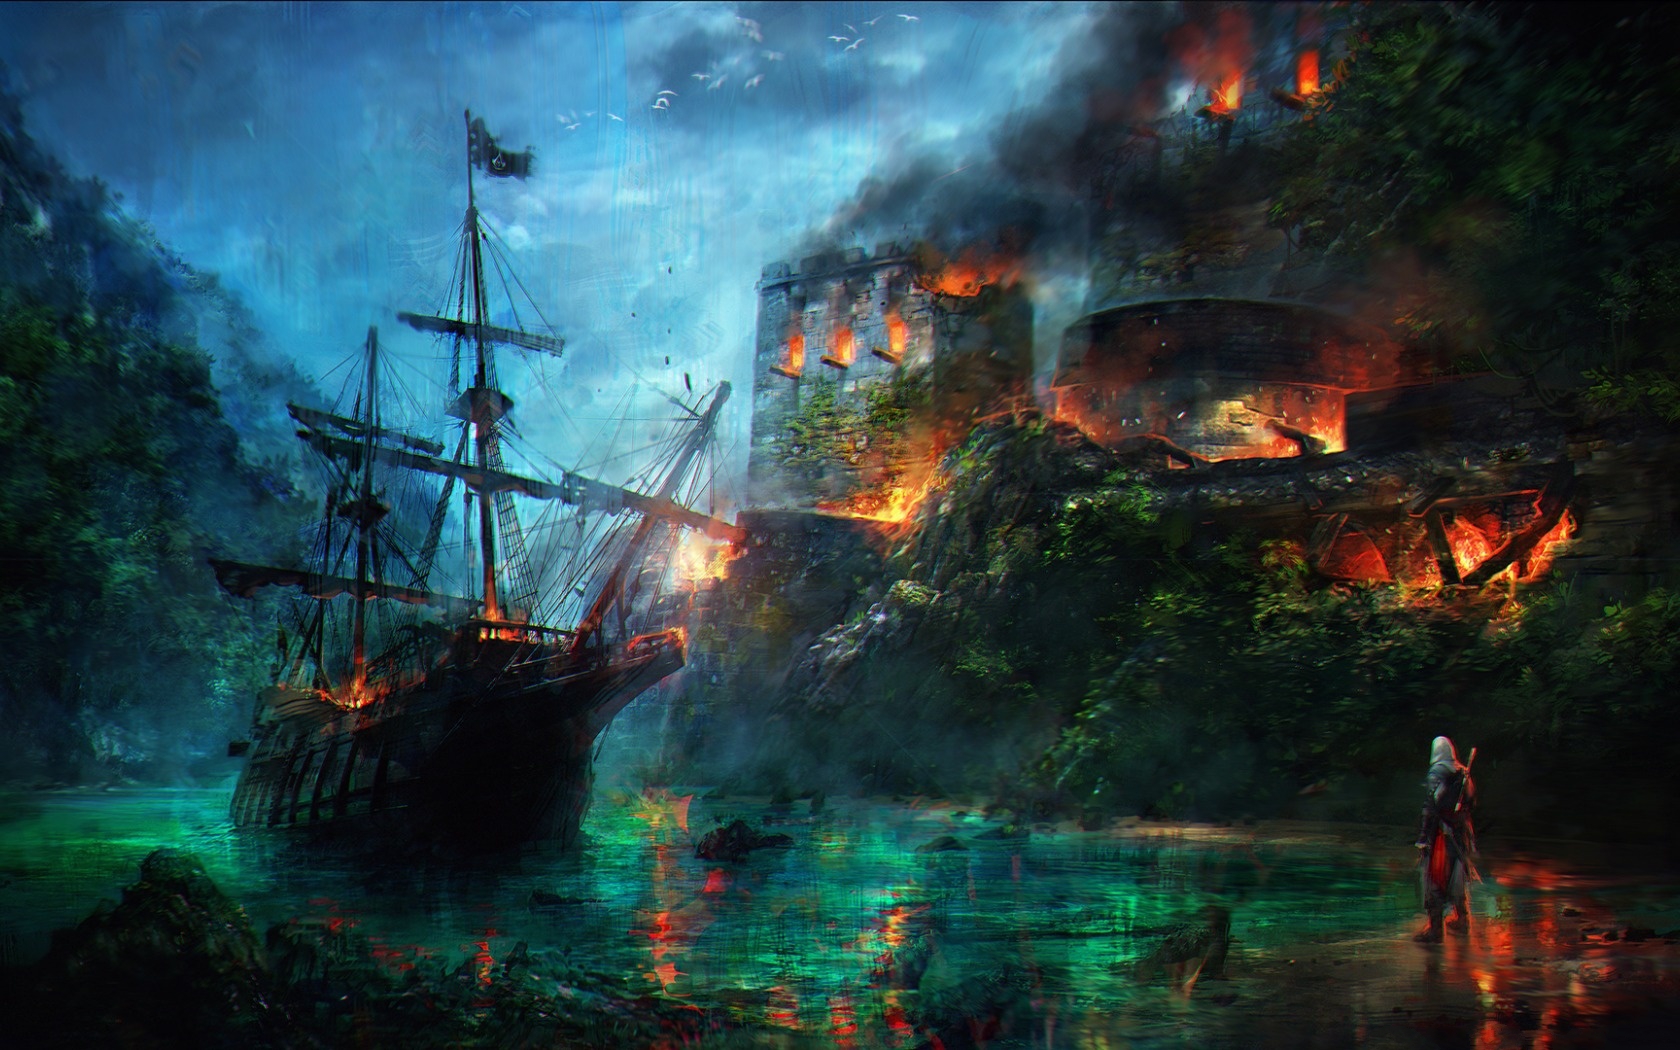 assassin's creed iv: black flag, fire, assassin's creed, video game, ship Aesthetic wallpaper